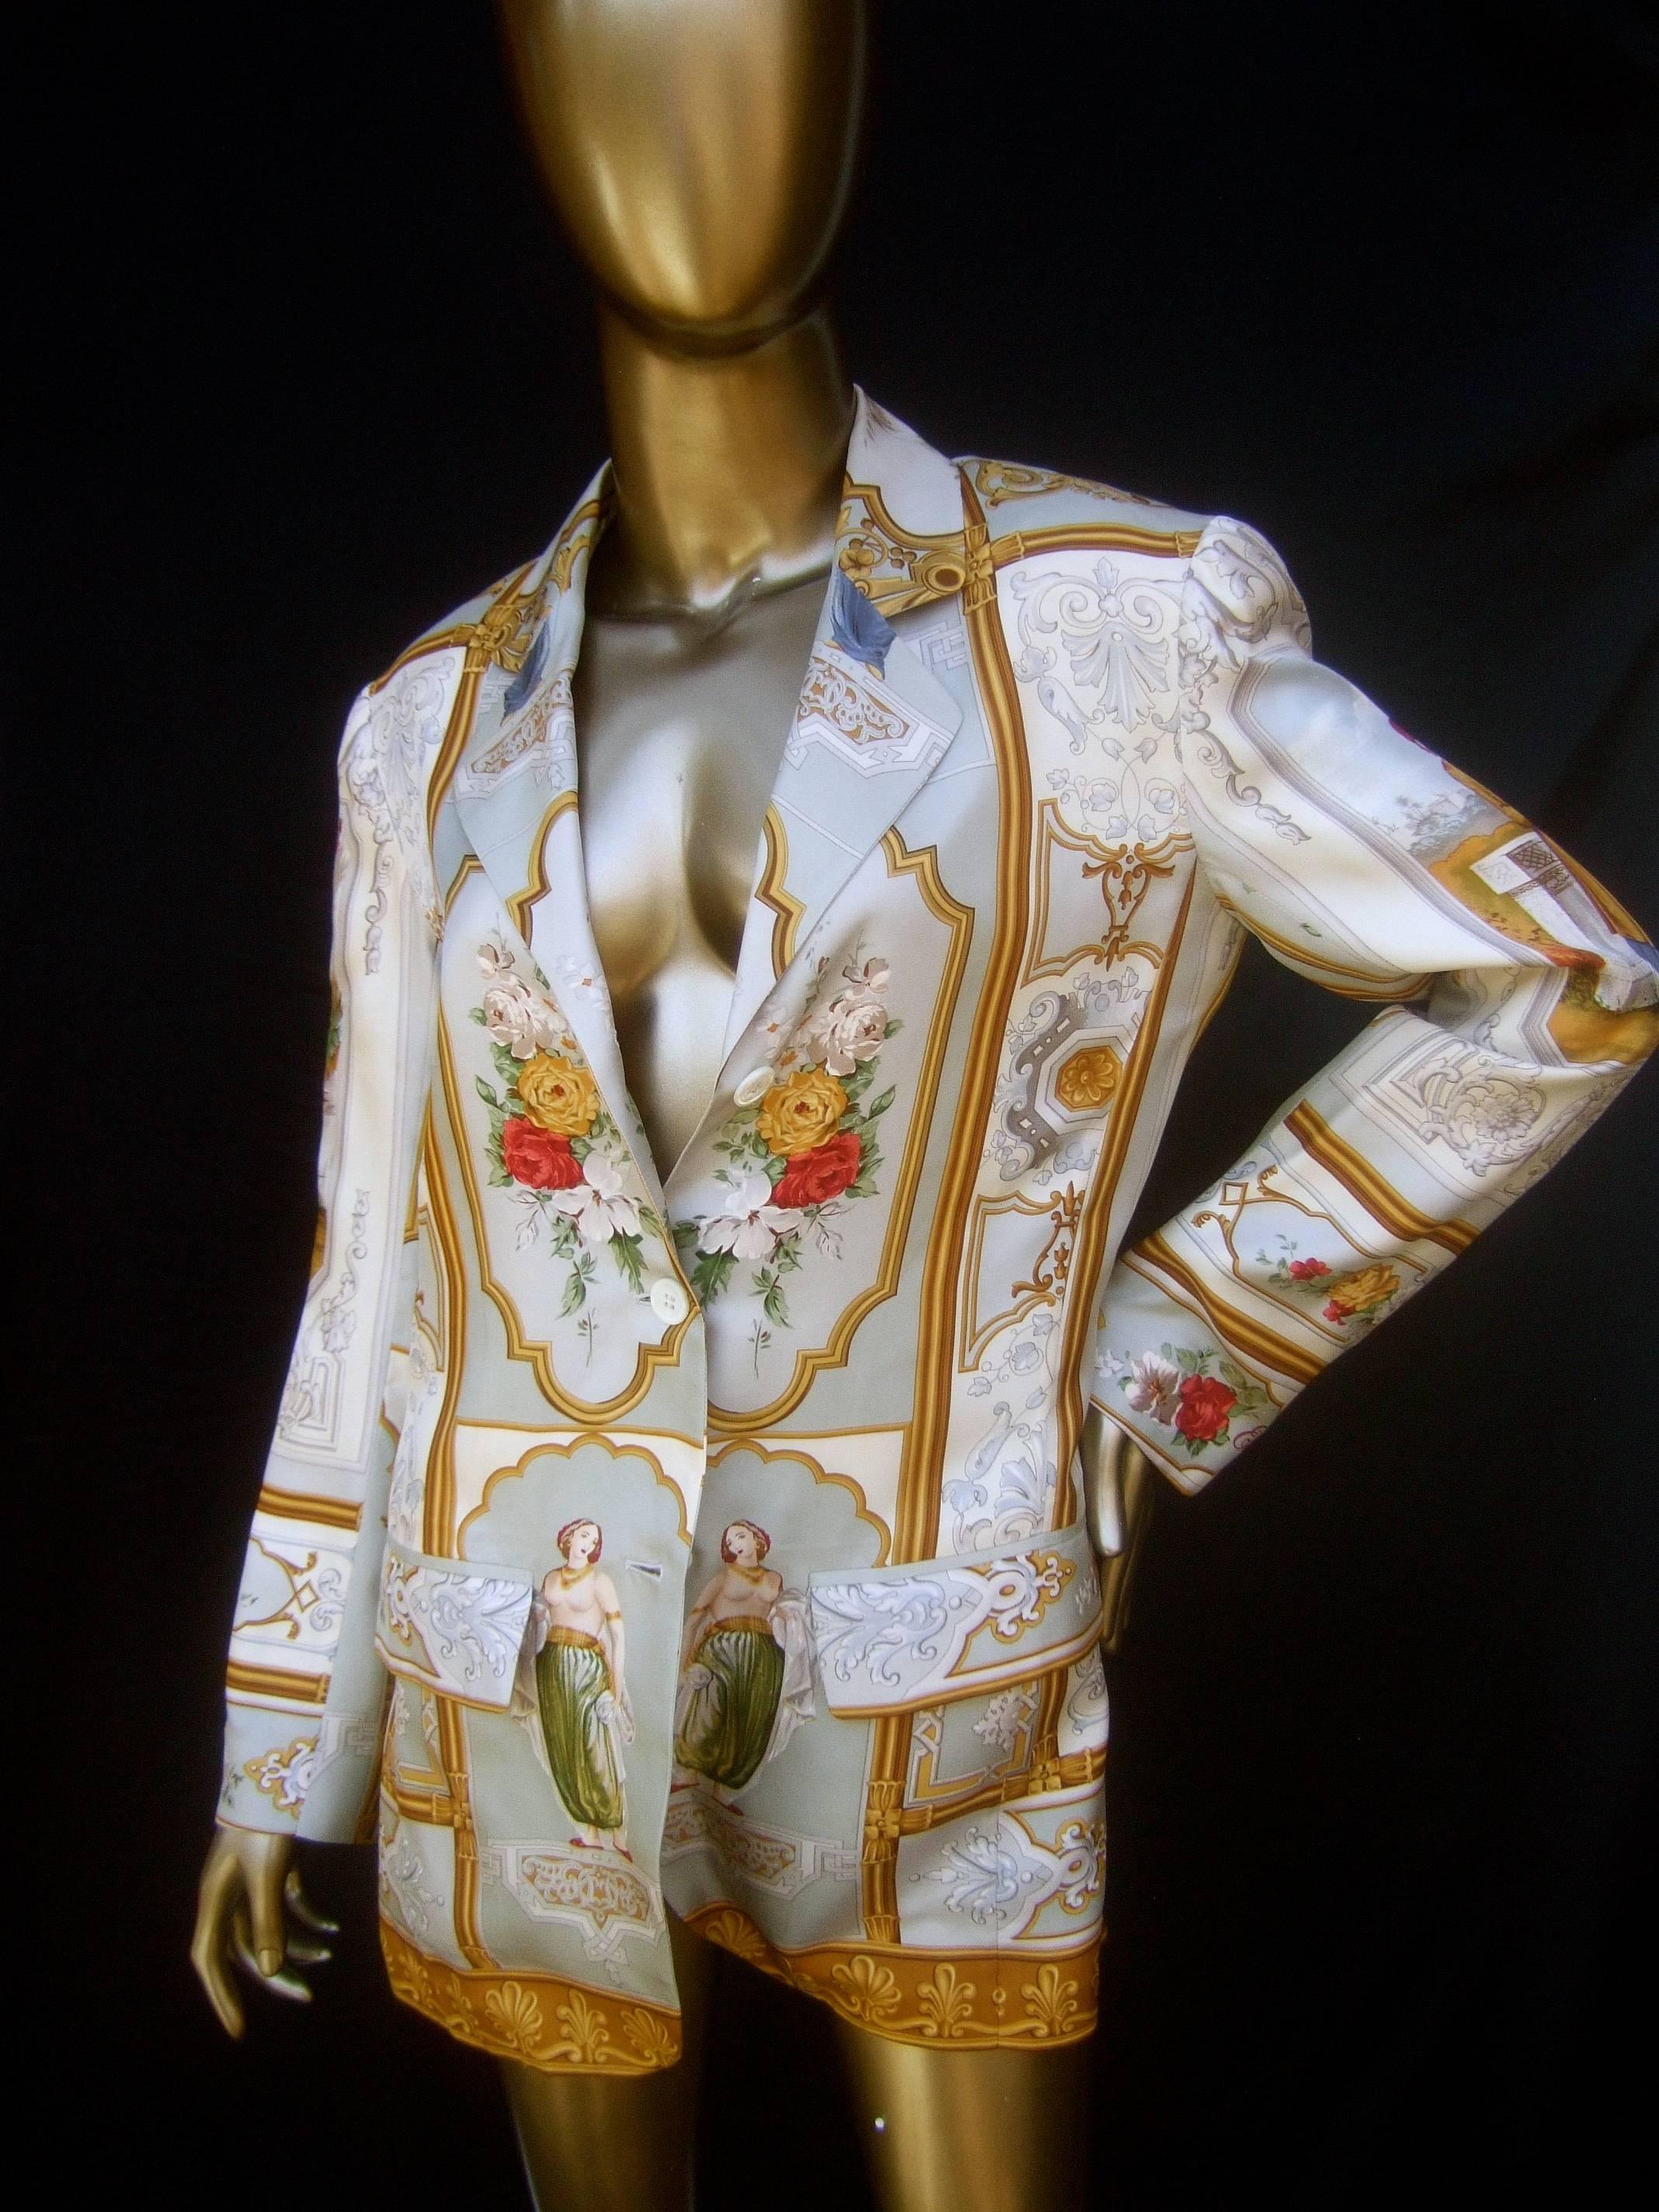 Etro Italian luxurious silk graphic print jacket Size 40 
The elegant designer silk jacket is illustrated 
with ornate gilded frame style graphics 

The front of the jacket features a pair of elegant
woman. The midsection of the jacket is